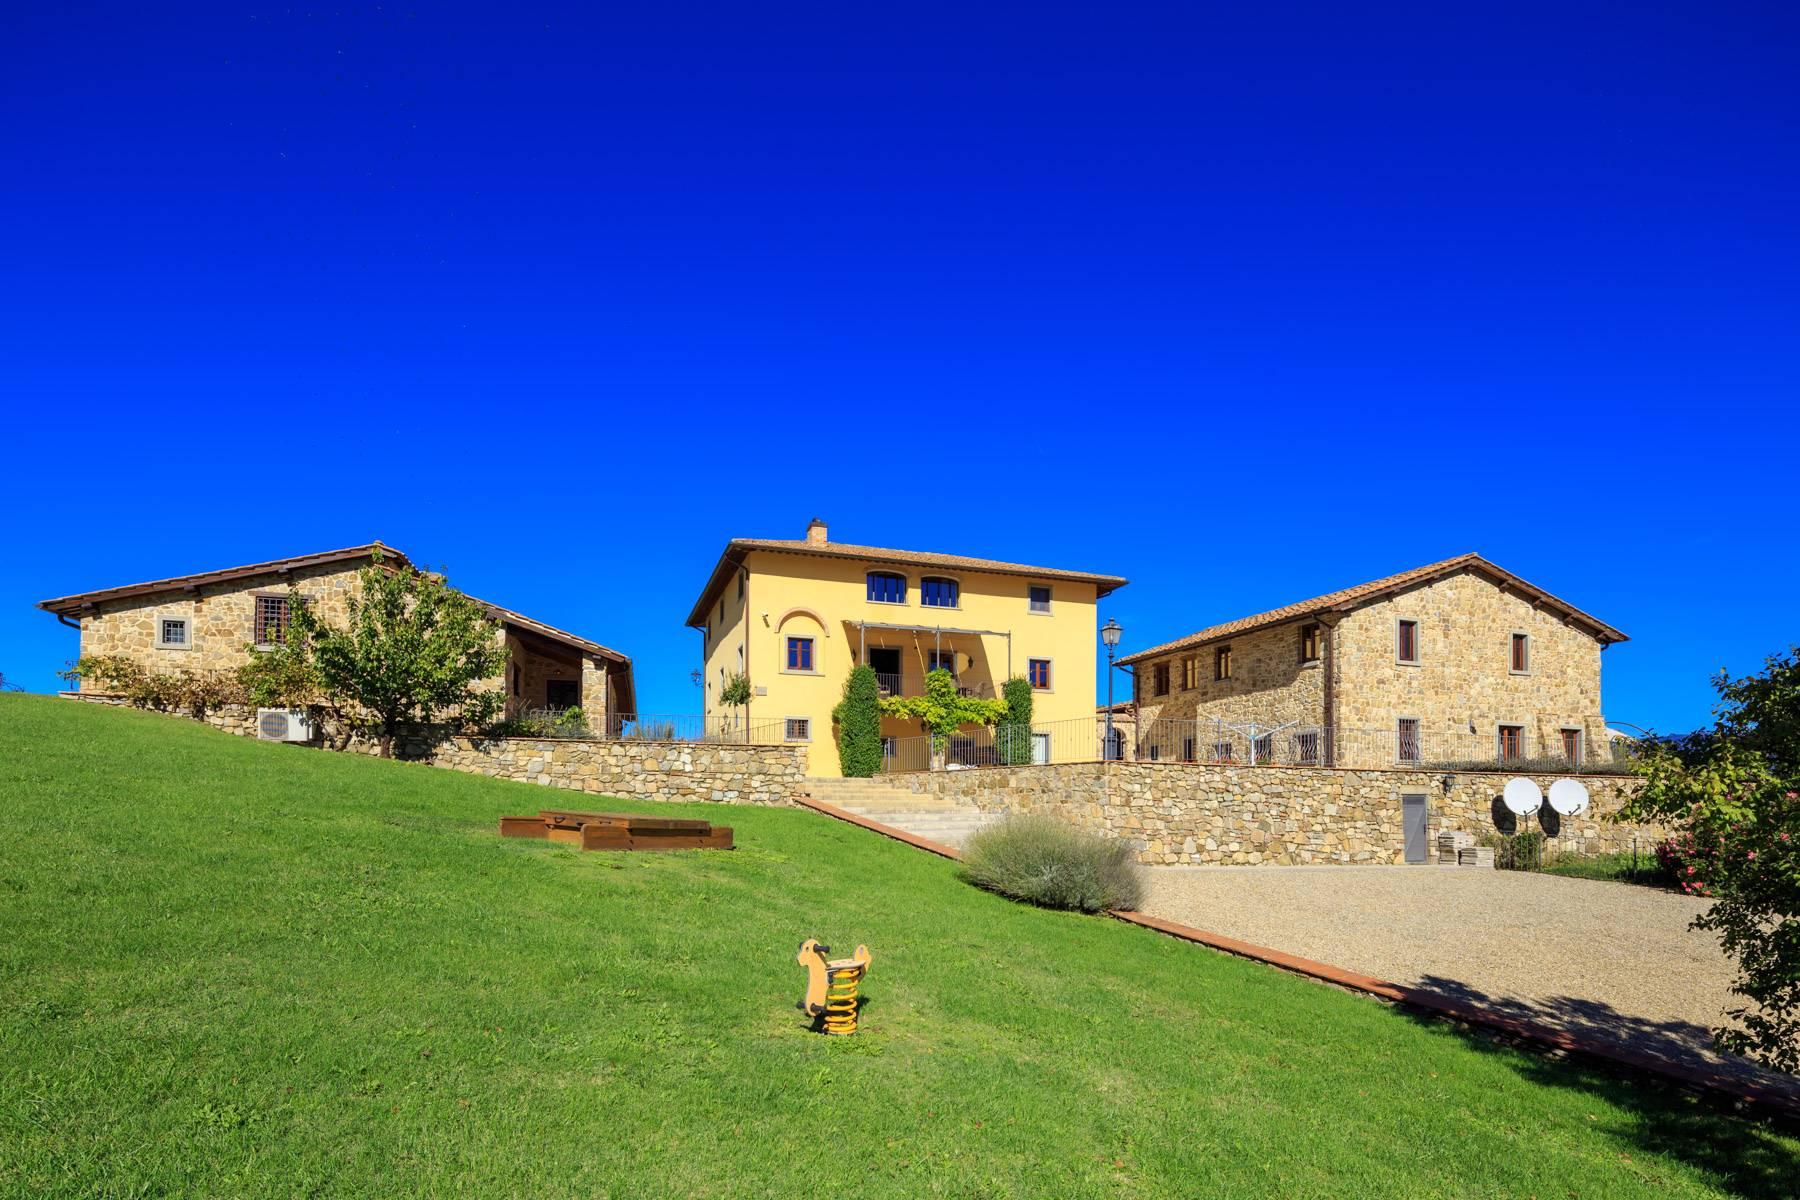 Marvelous estate with views over the Casentino valley - 6